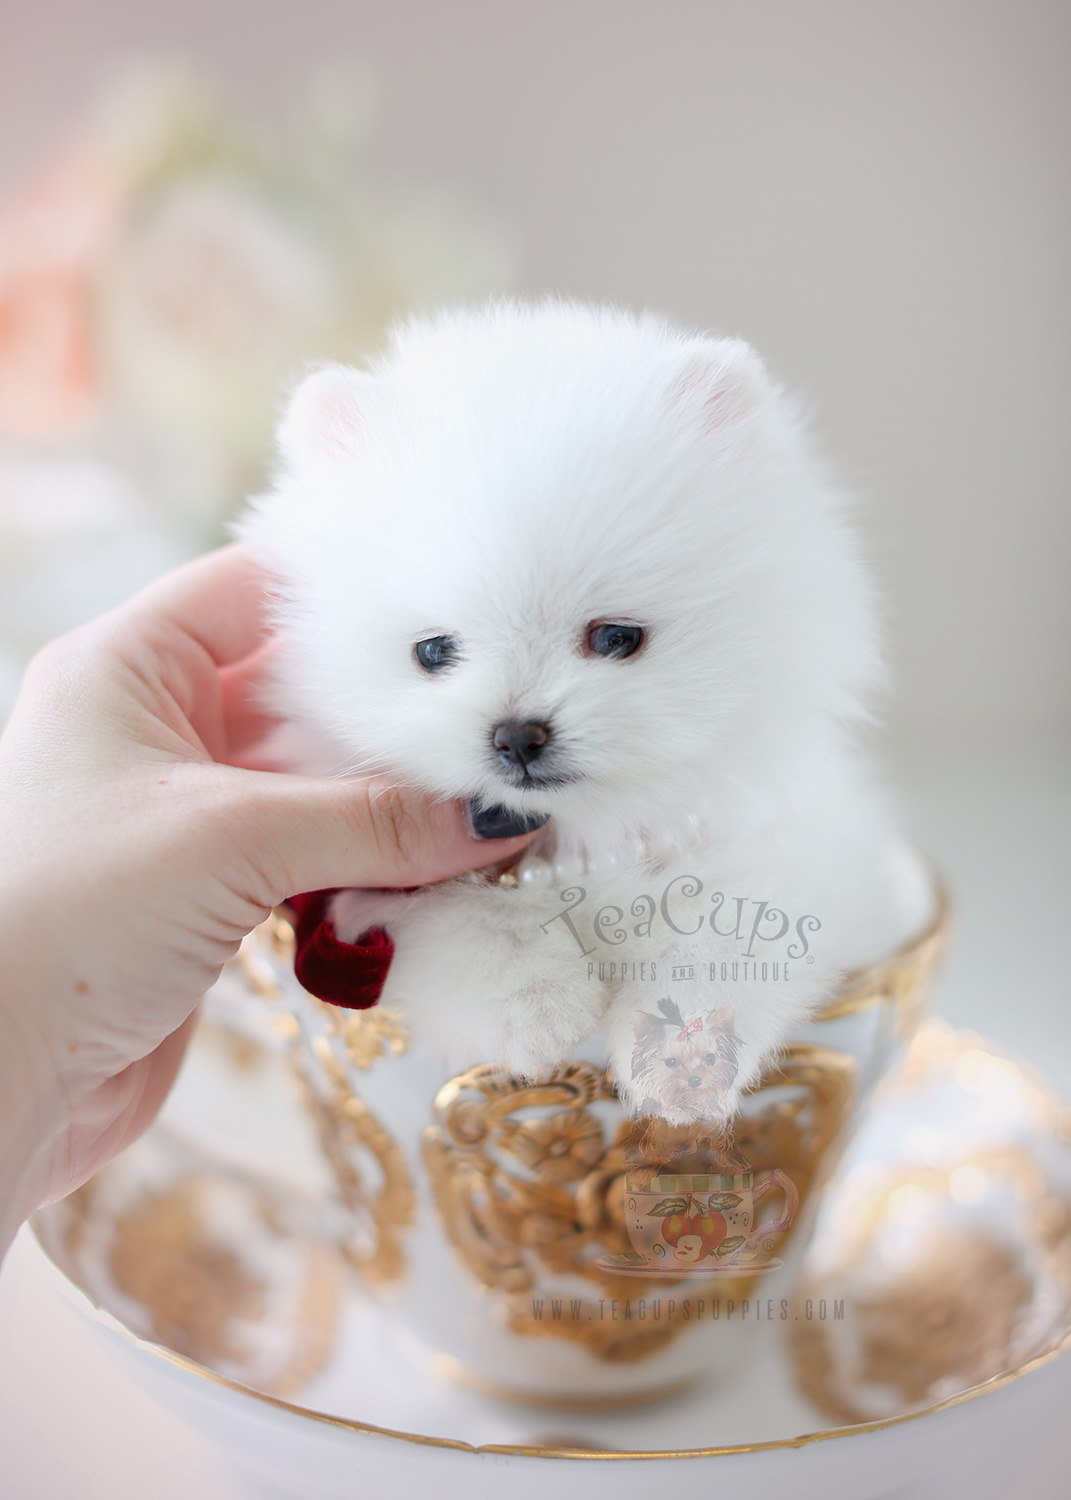 Teacup Pomeranian Puppies For Sale in Miami, Ft. Lauderdale Teacups